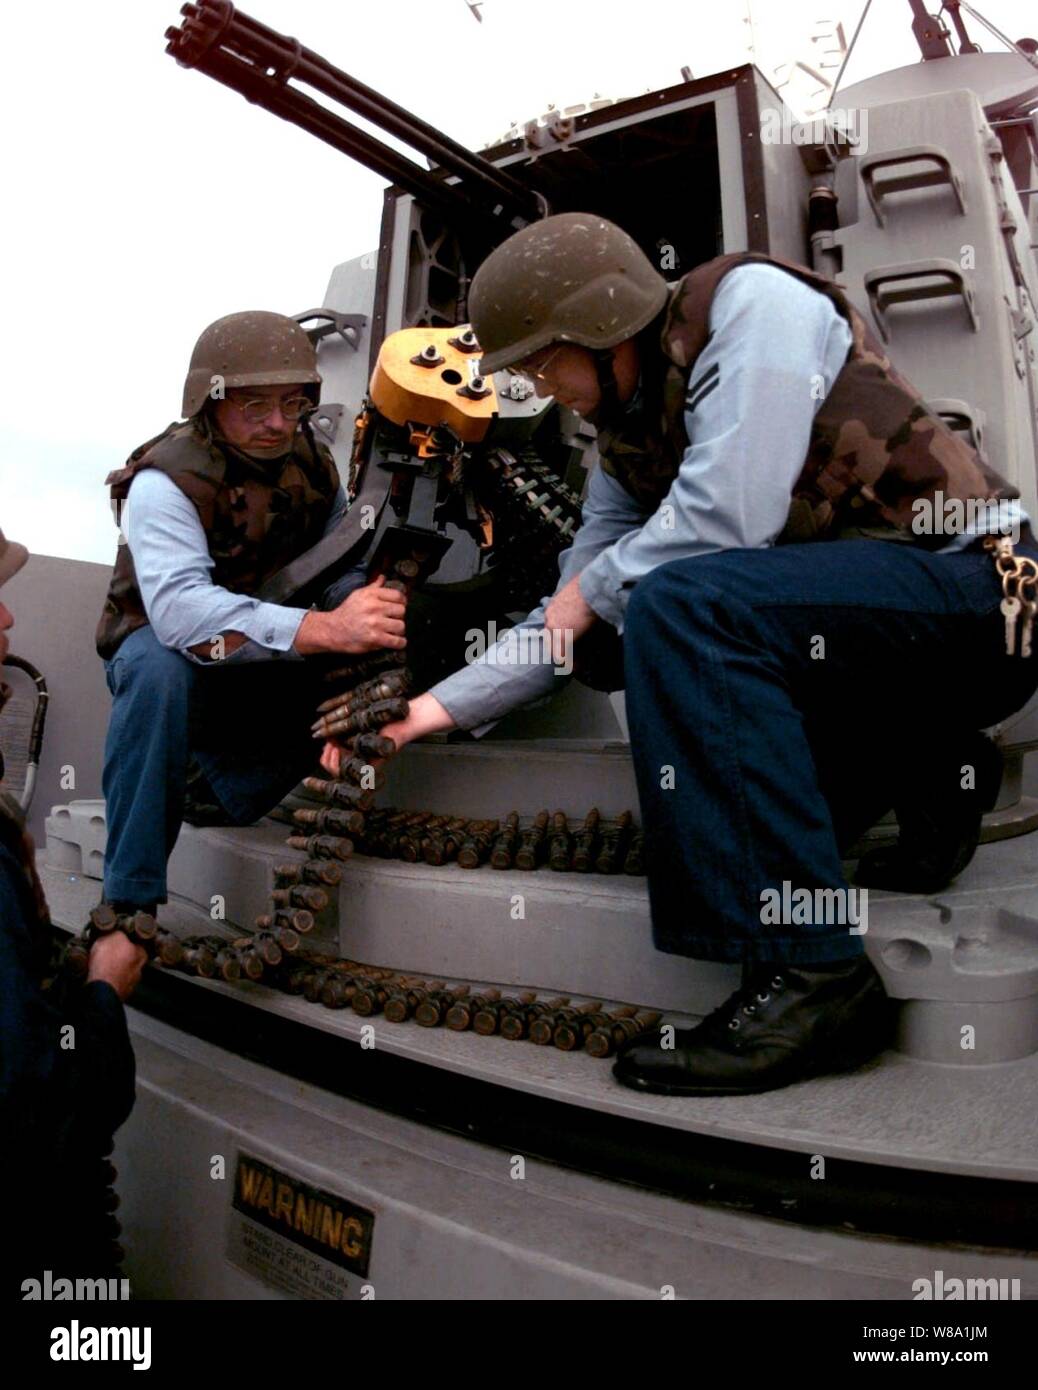 Petty Officers 2nd Class Miguel Villarreal (left) and Tracy Anderson (right) load a chain of 20 mm ammunition into the forward Phalanx Close-in Weapon System mount aboard the guided missile destroyer USS John S. McCain (DDG 56) on Feb. 11, 1998.  The McCain is operating in the Persian Gulf in support of Operation Southern Watch which is the U.S. and coalition enforcement of the no-fly-zone over Southern Iraq.  Villarreal and Anderson are Navy fire controlman. Stock Photo